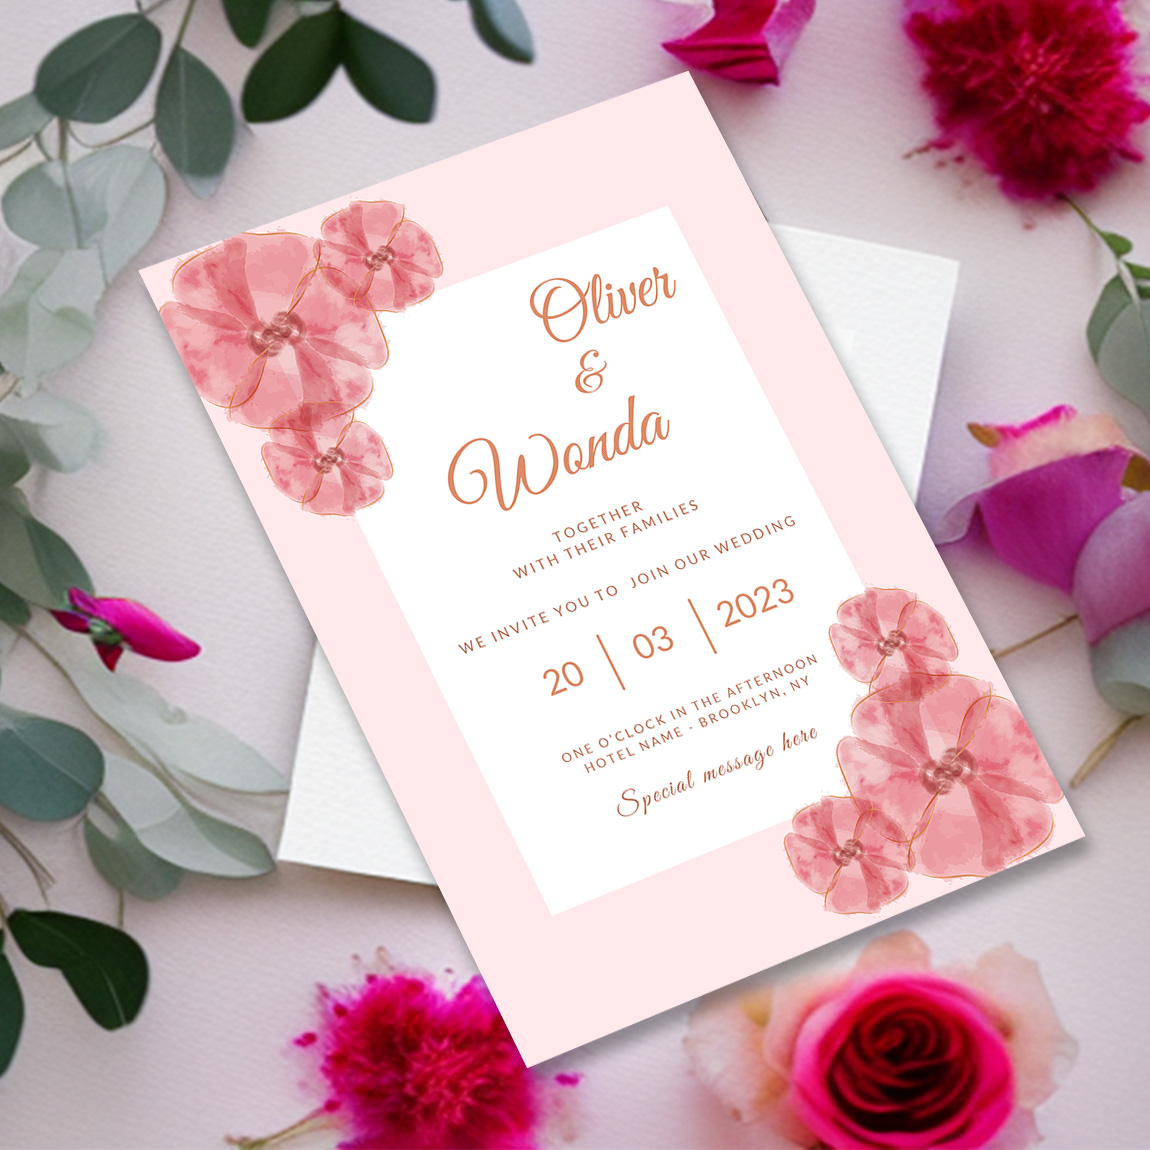 Image with amazing wedding invitation card in pink colors and flowers.